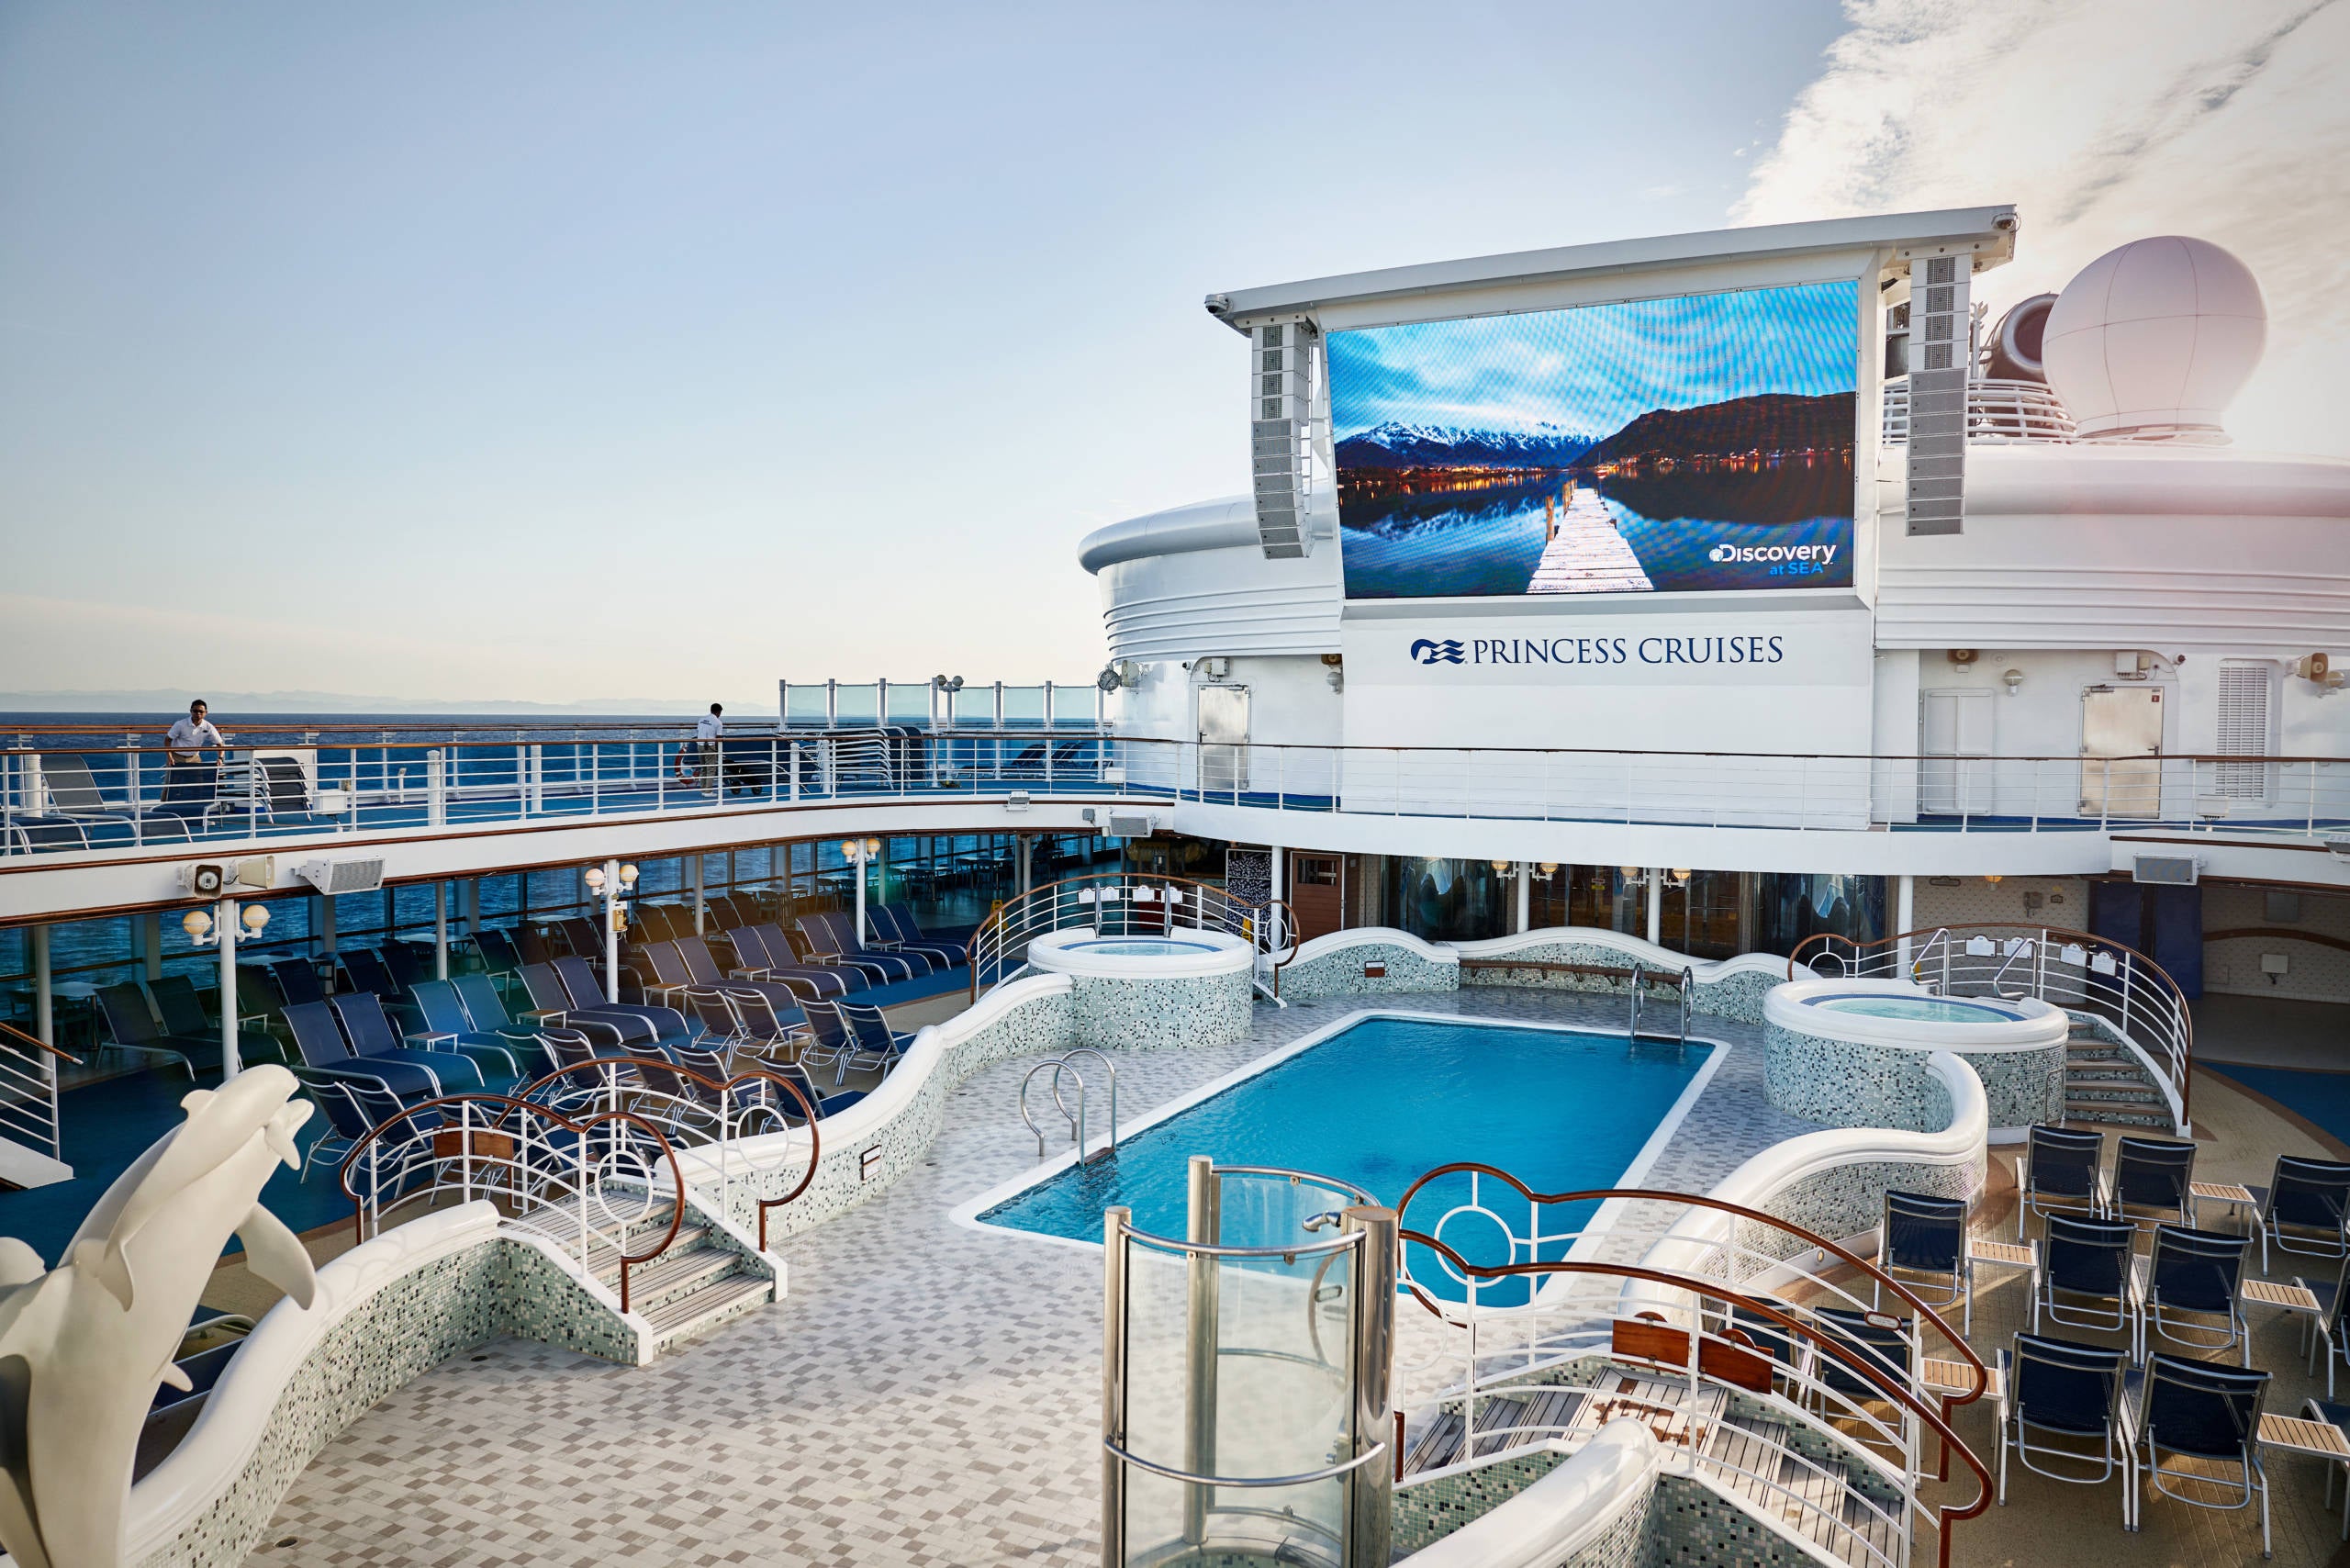 Princess Cruises ships are topped with lots of pool and sunning areas. (Photo courtesy of Princess Cruises)